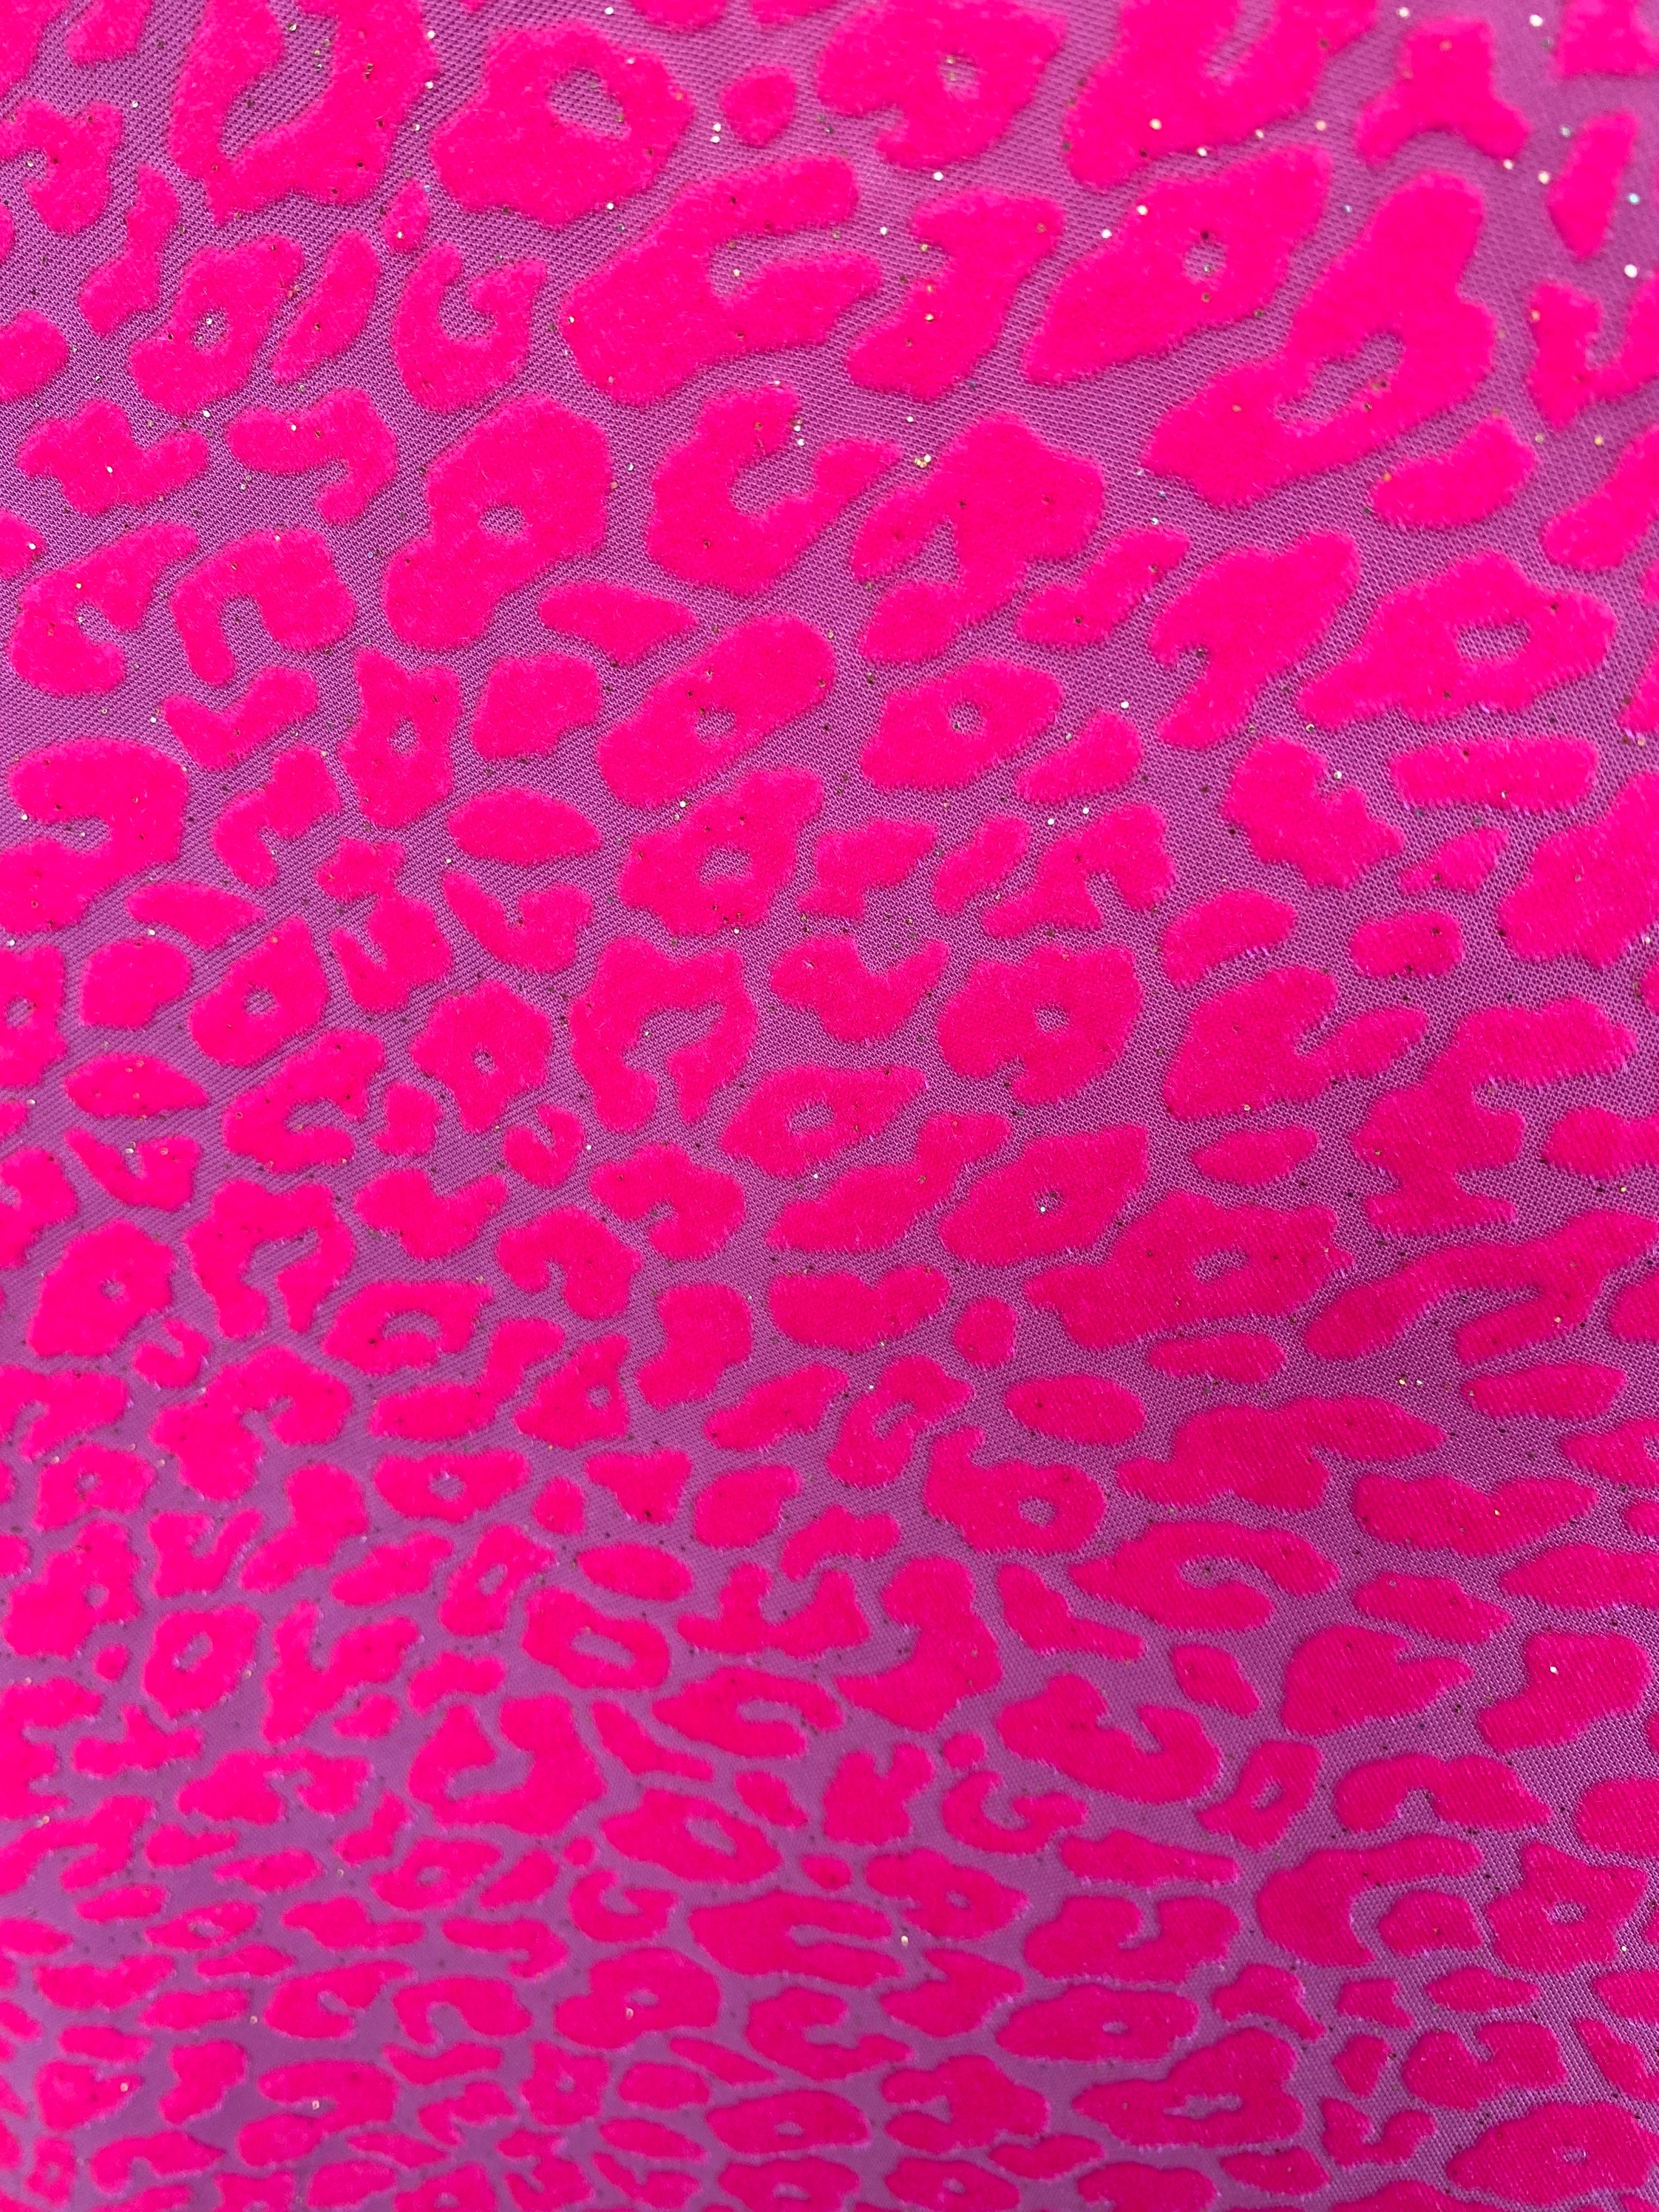 New Neon Pink Velvet Leopard Print With Glitter Four-way | Etsy